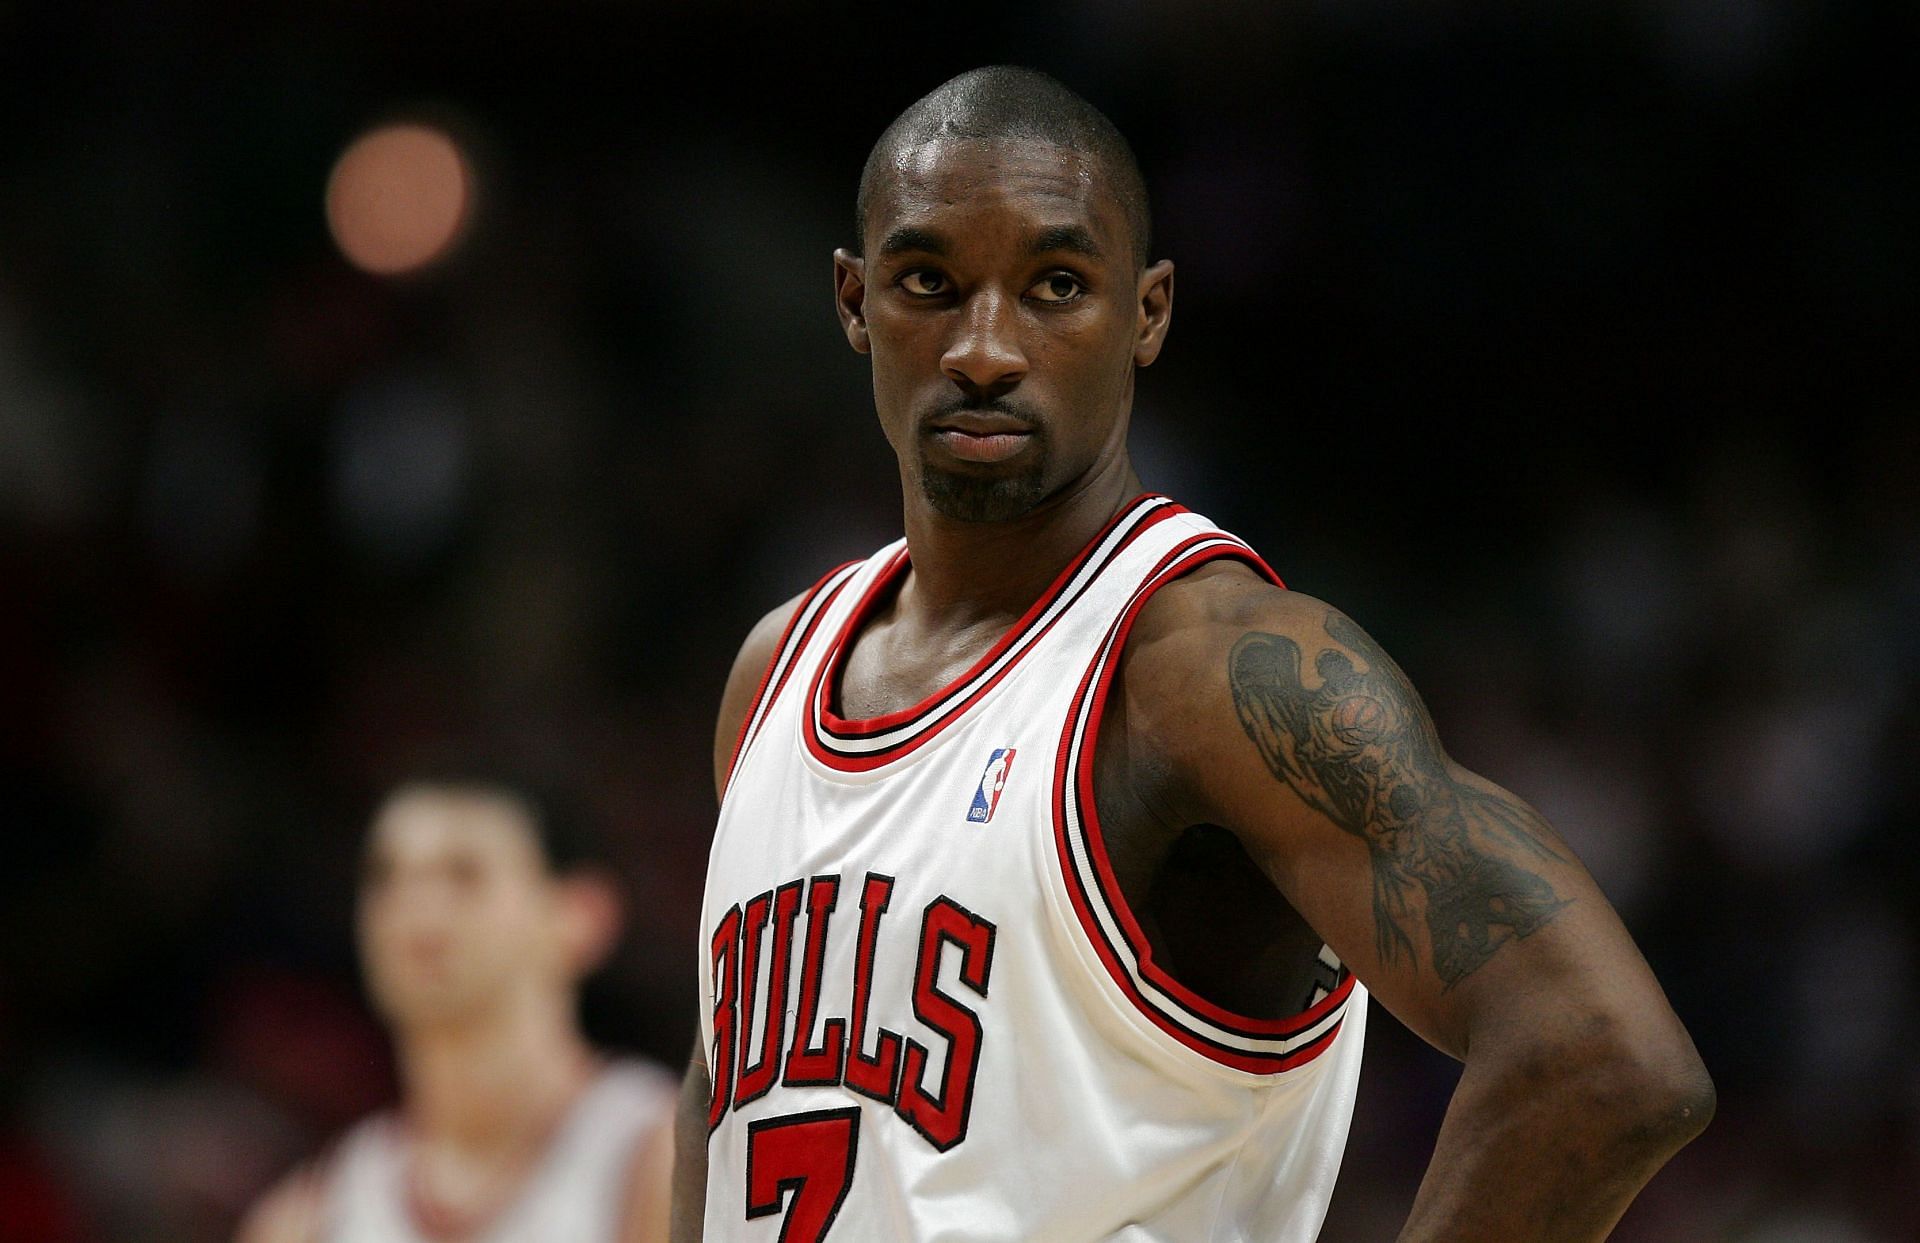 Ben Gordon played for the Chicago Bulls between 2004 and 2009.